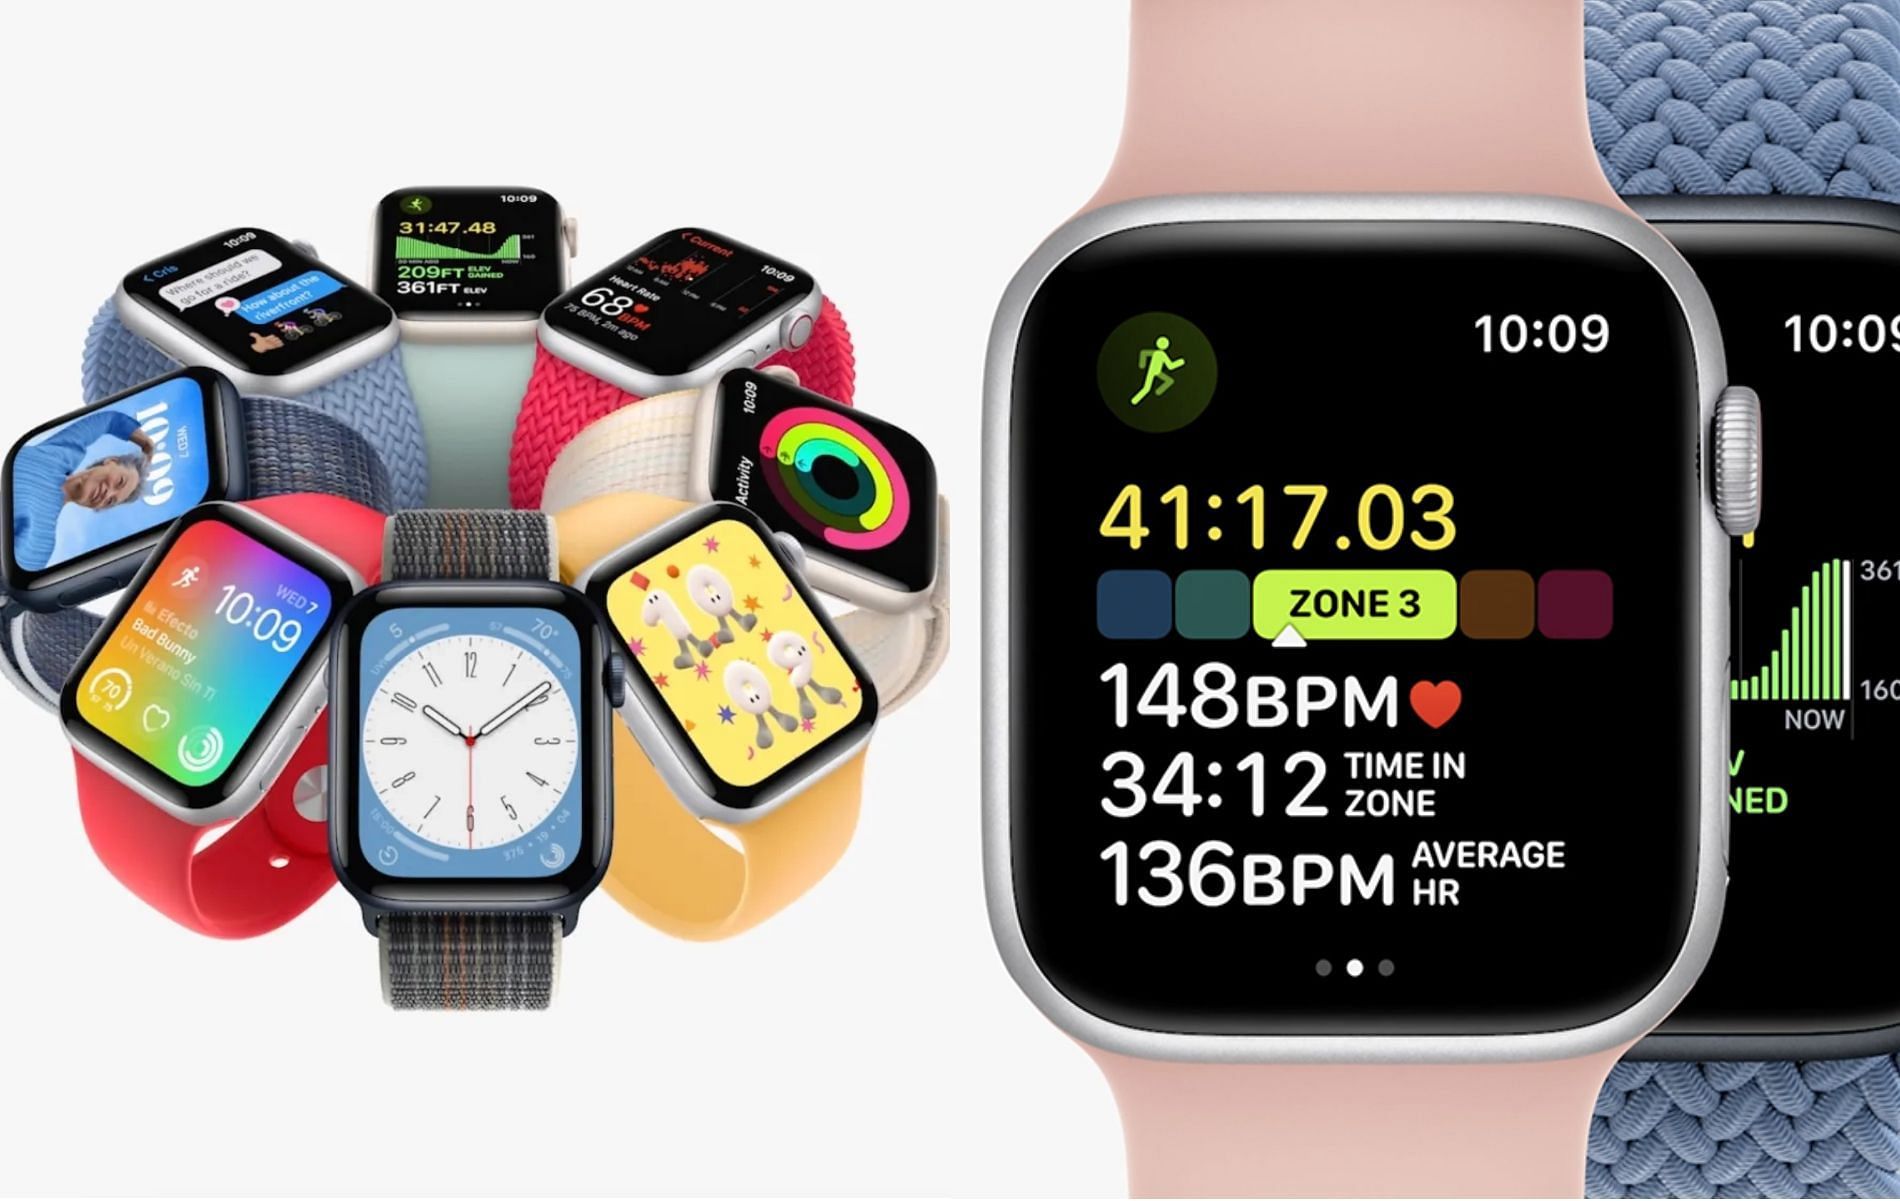 Apple Watch SE 2022 vs. Apple Watch SE 2020: What's the Difference? - CNET